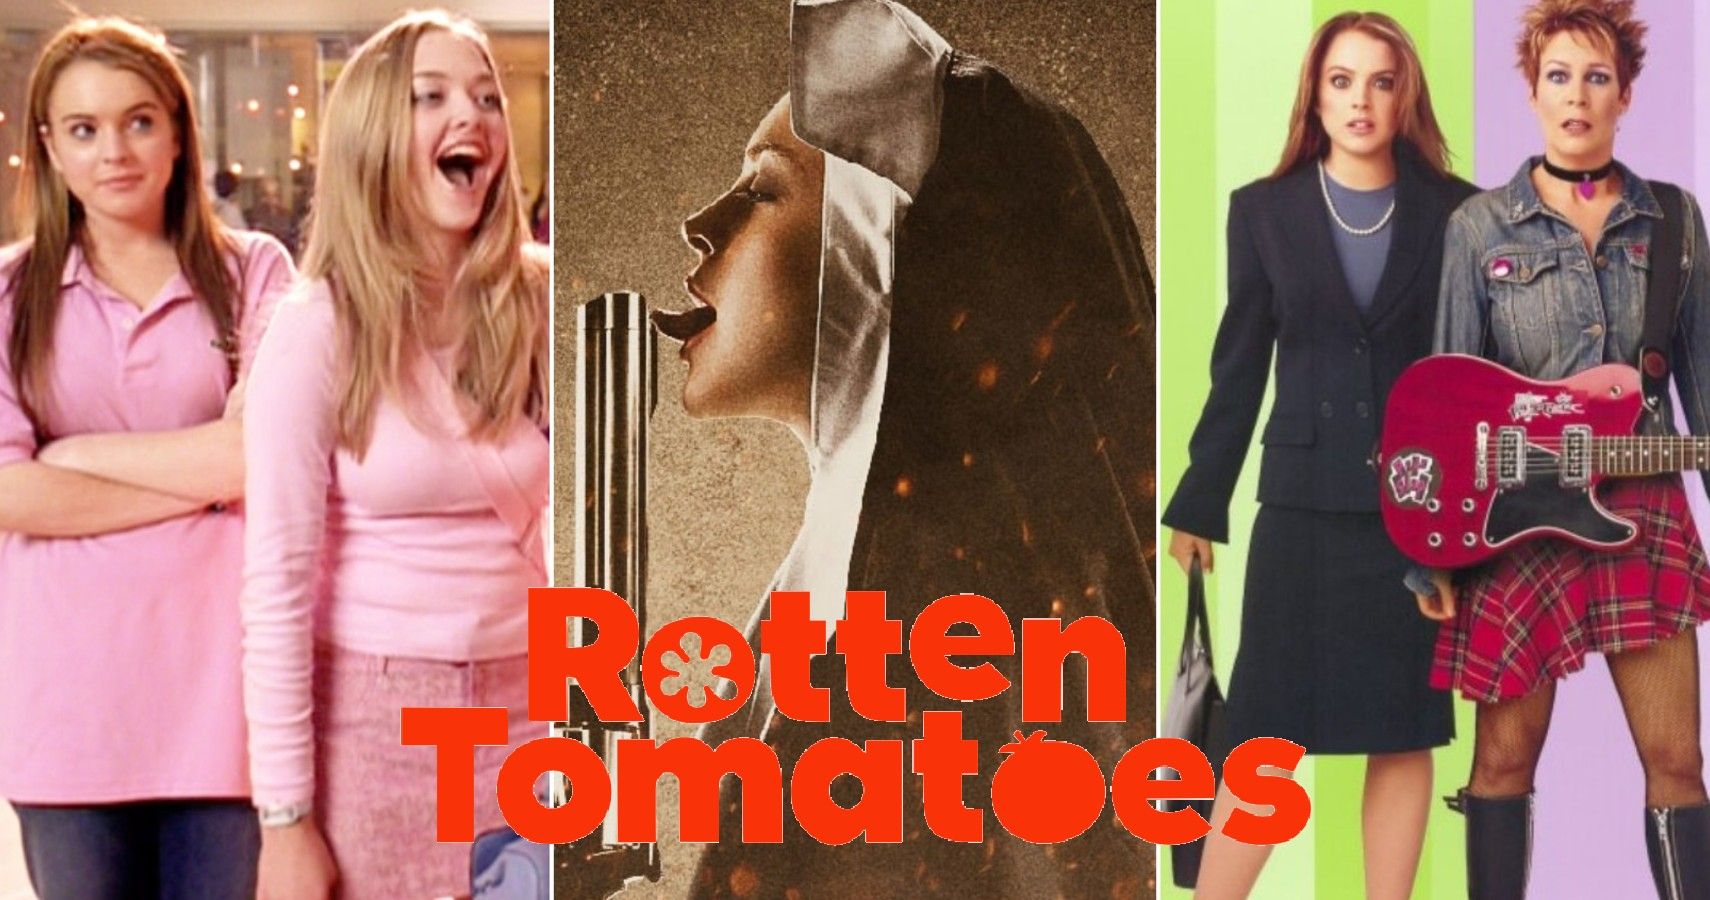 Lindsay Lohans Top 10 Movies Ranked Best To Worst (According To Rotten Tomatoes)